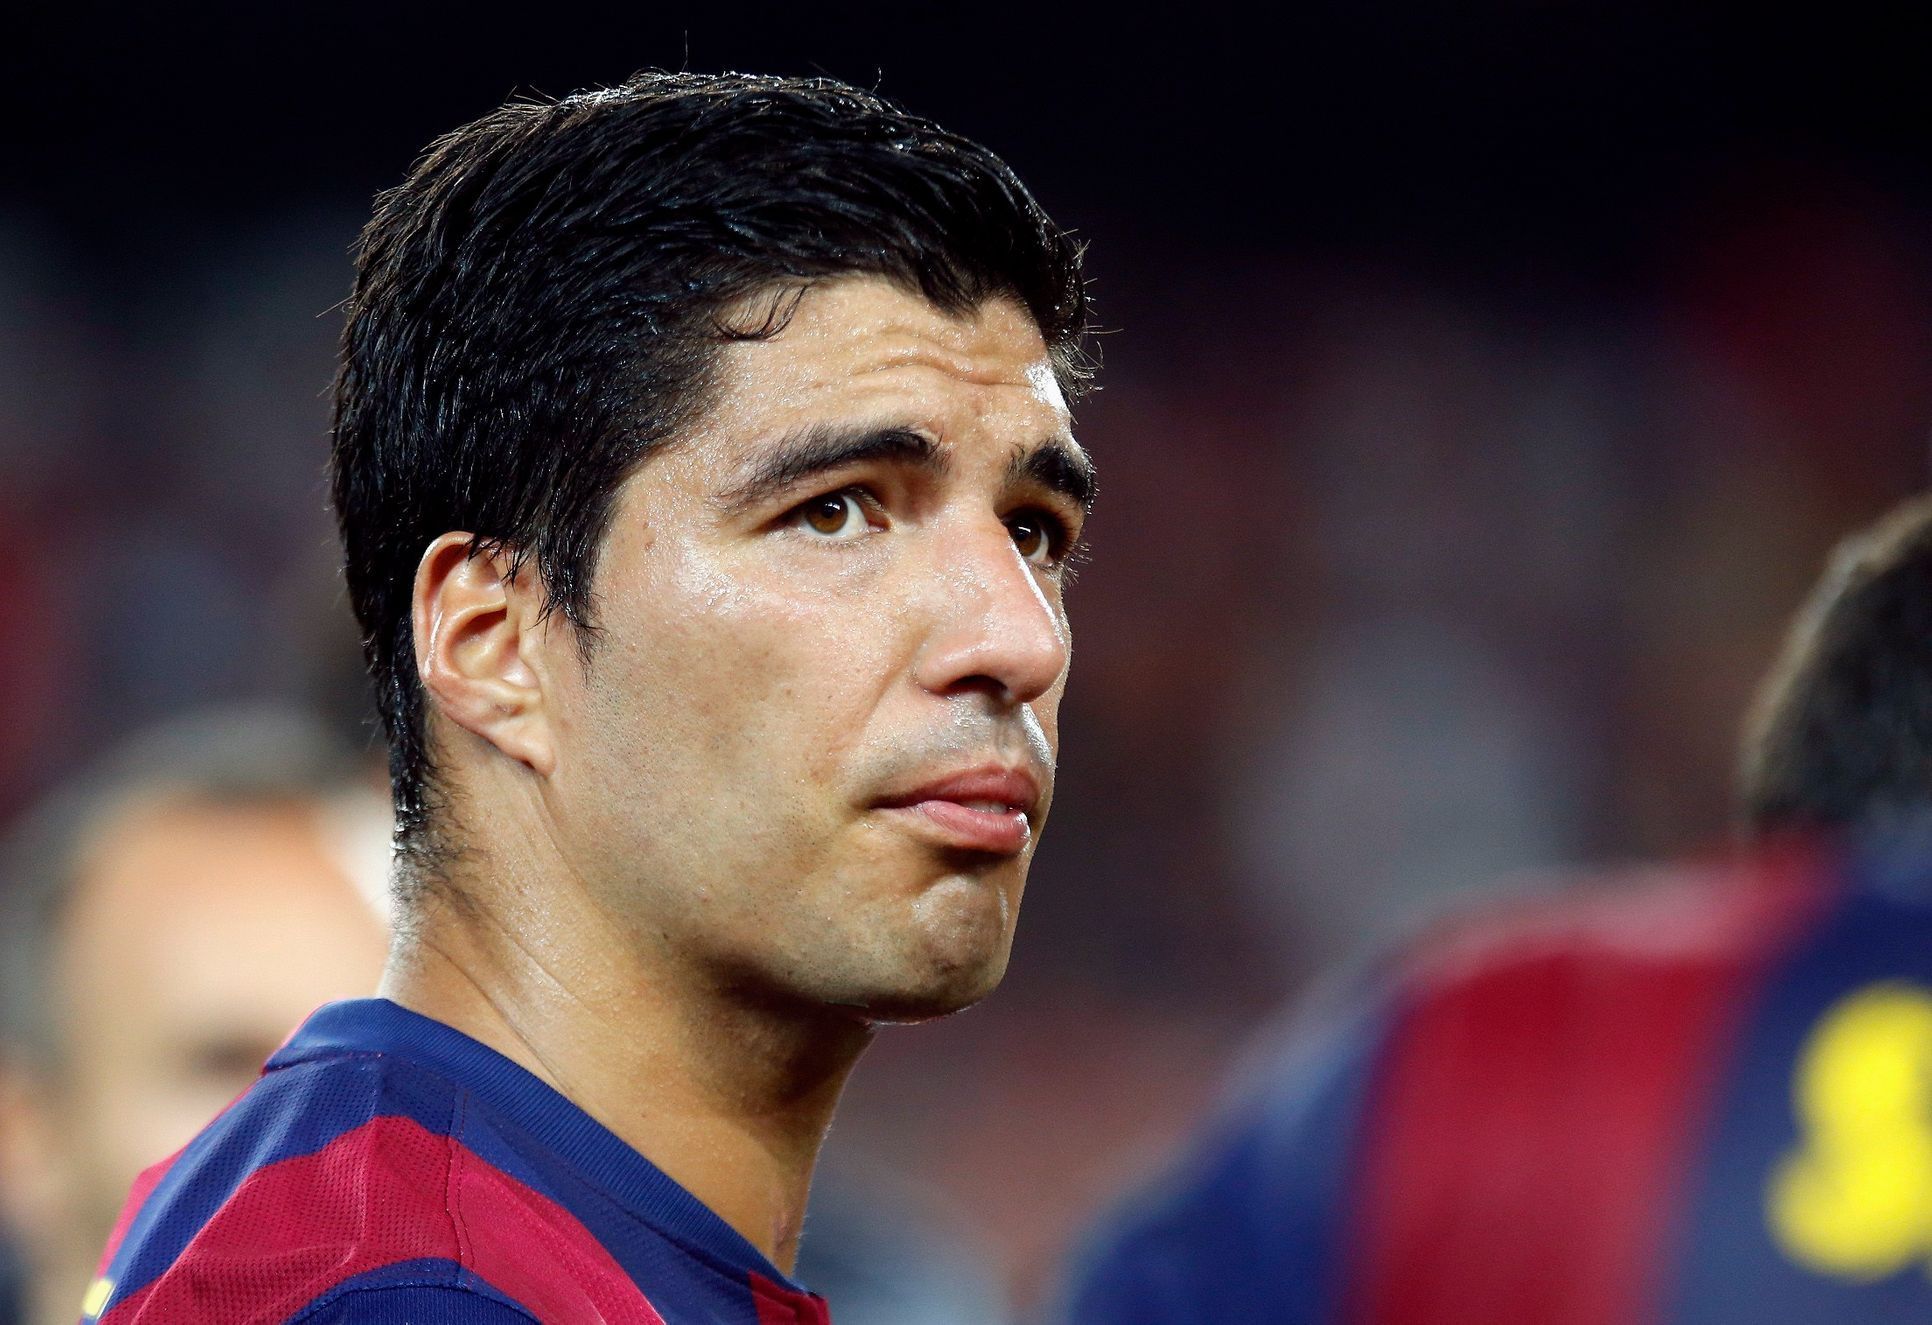 Barcelona's Suarez looks on after winning the Joan Gamper Trophy soccer match against Mexico's Club Leon at Nou Camp stadium in Barcelona